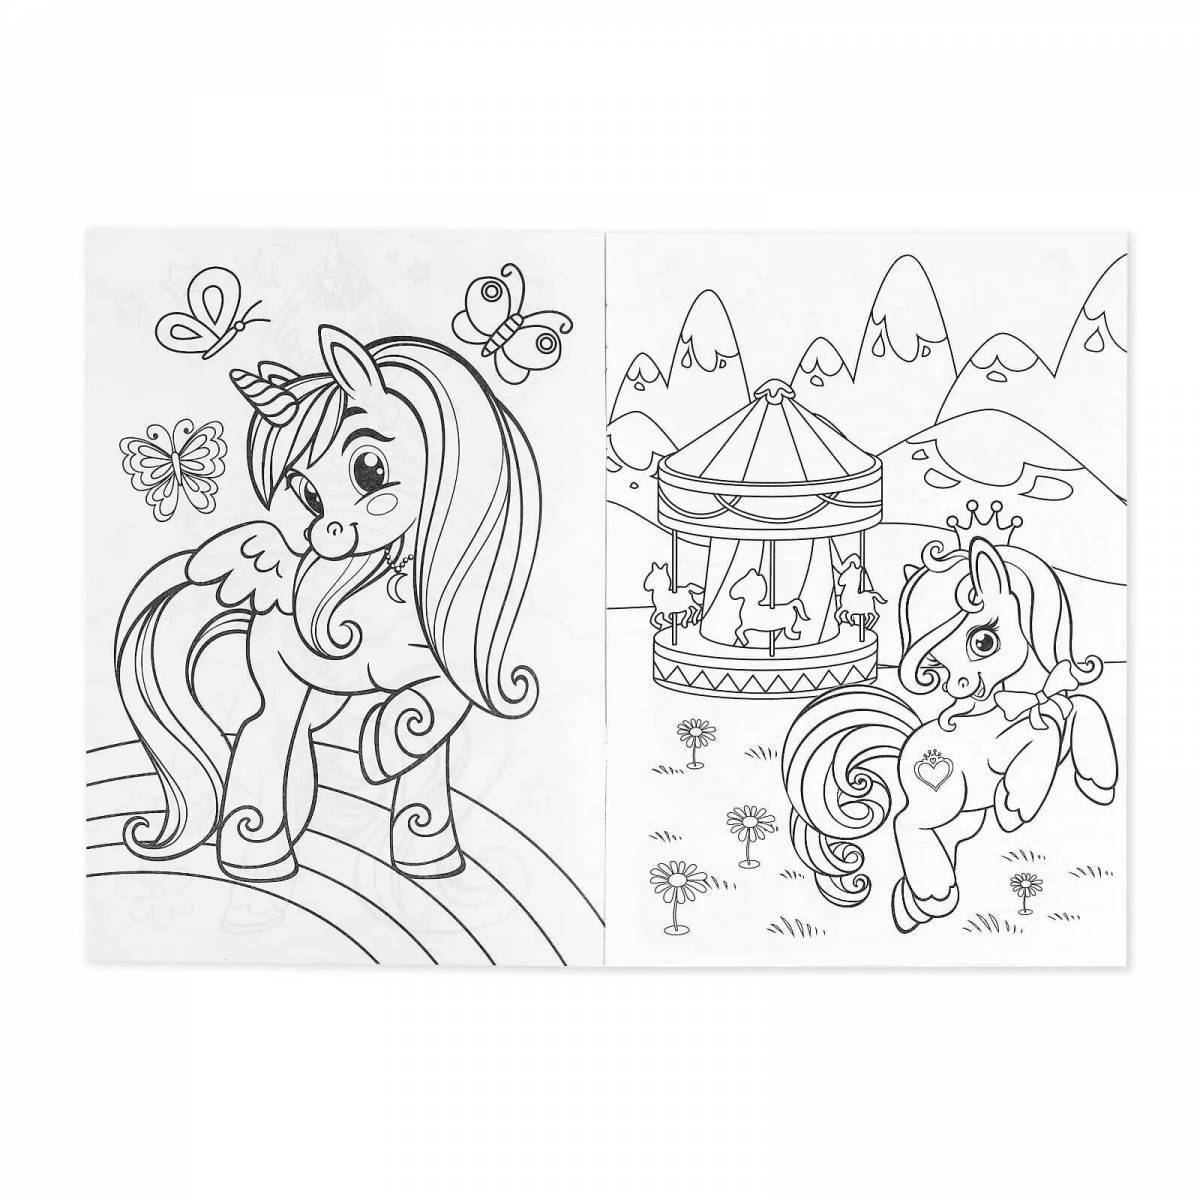 Awesome coloring pages 2 pcs